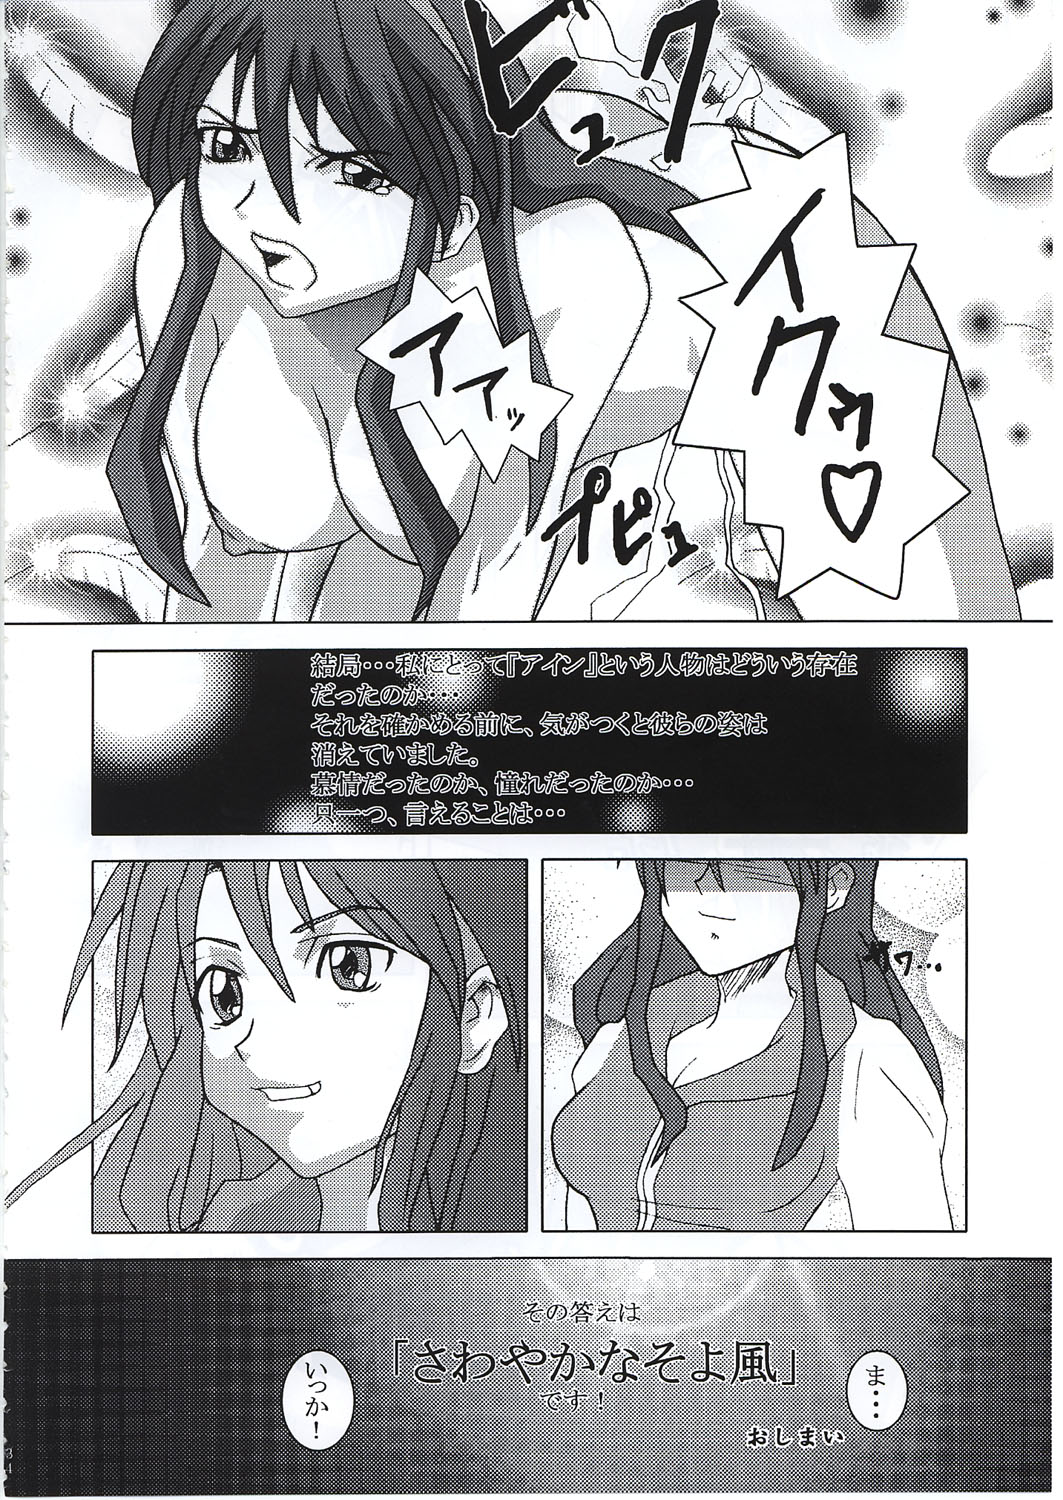 (C62) [NINE TAIL (GRIFON, YaO.)] Toraware Koneko (King of Fighters, Dead or Alive) page 32 full